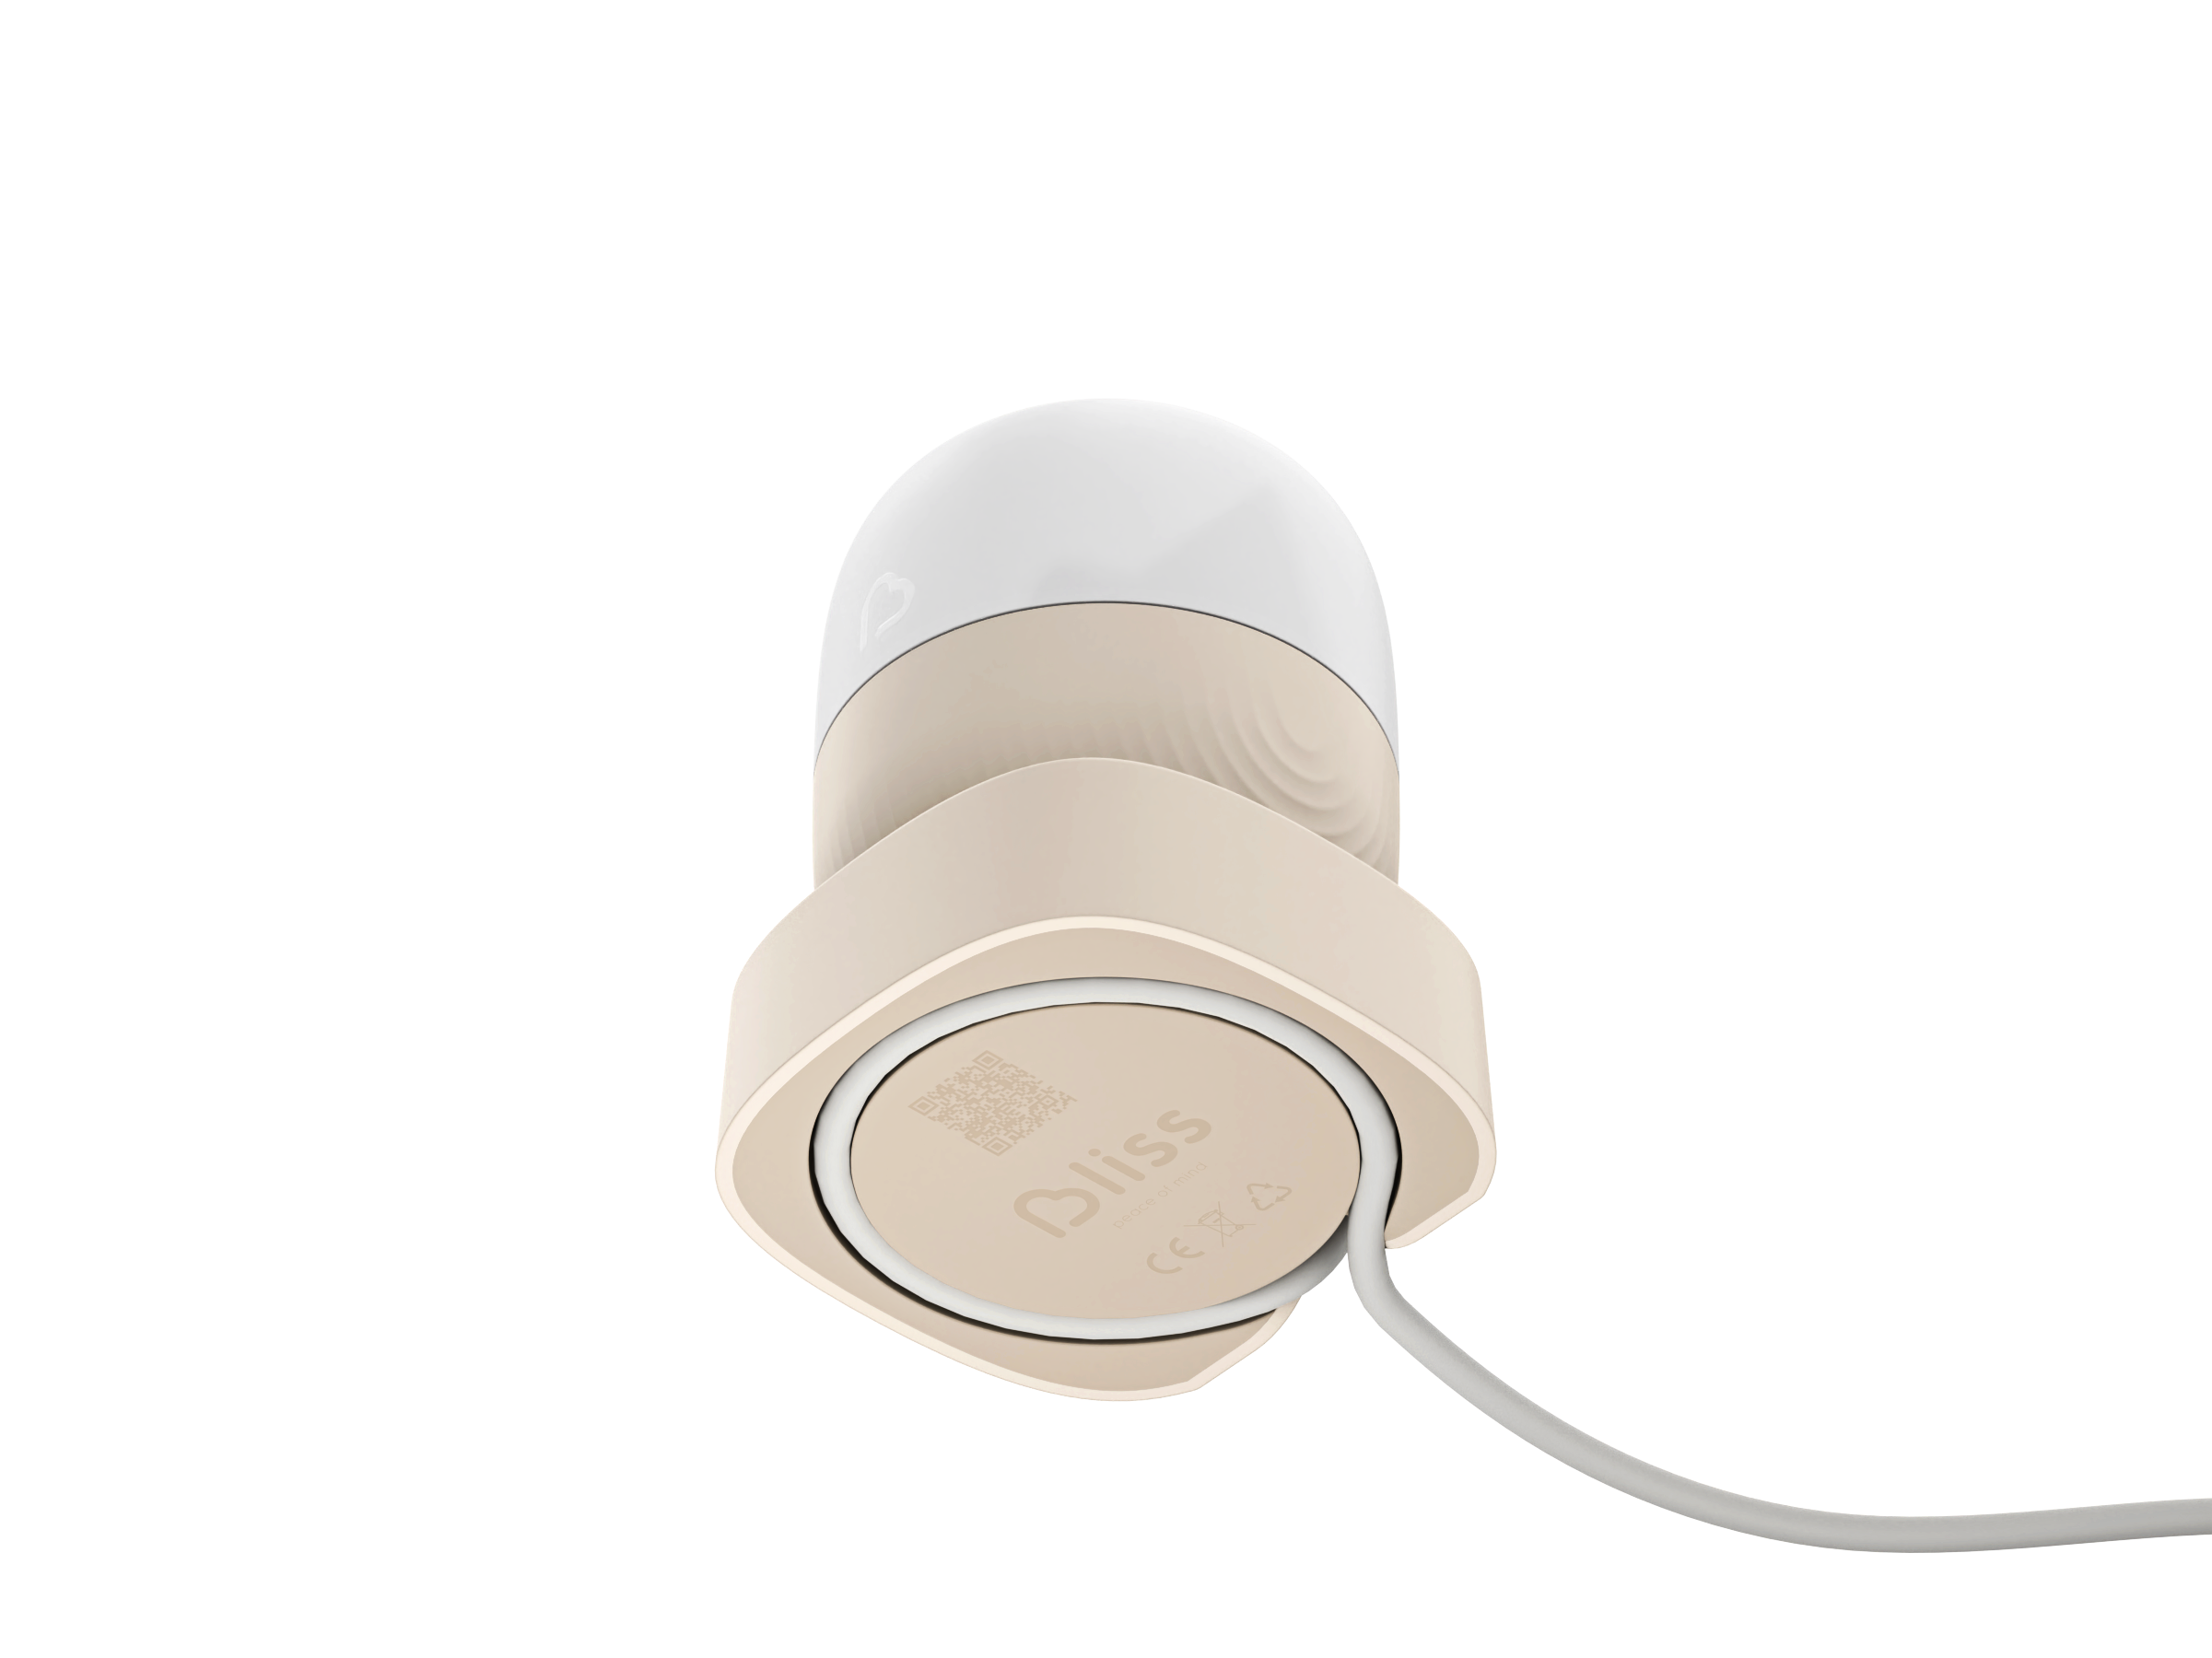 Bliss: a Sustainable North Star for baby monitors